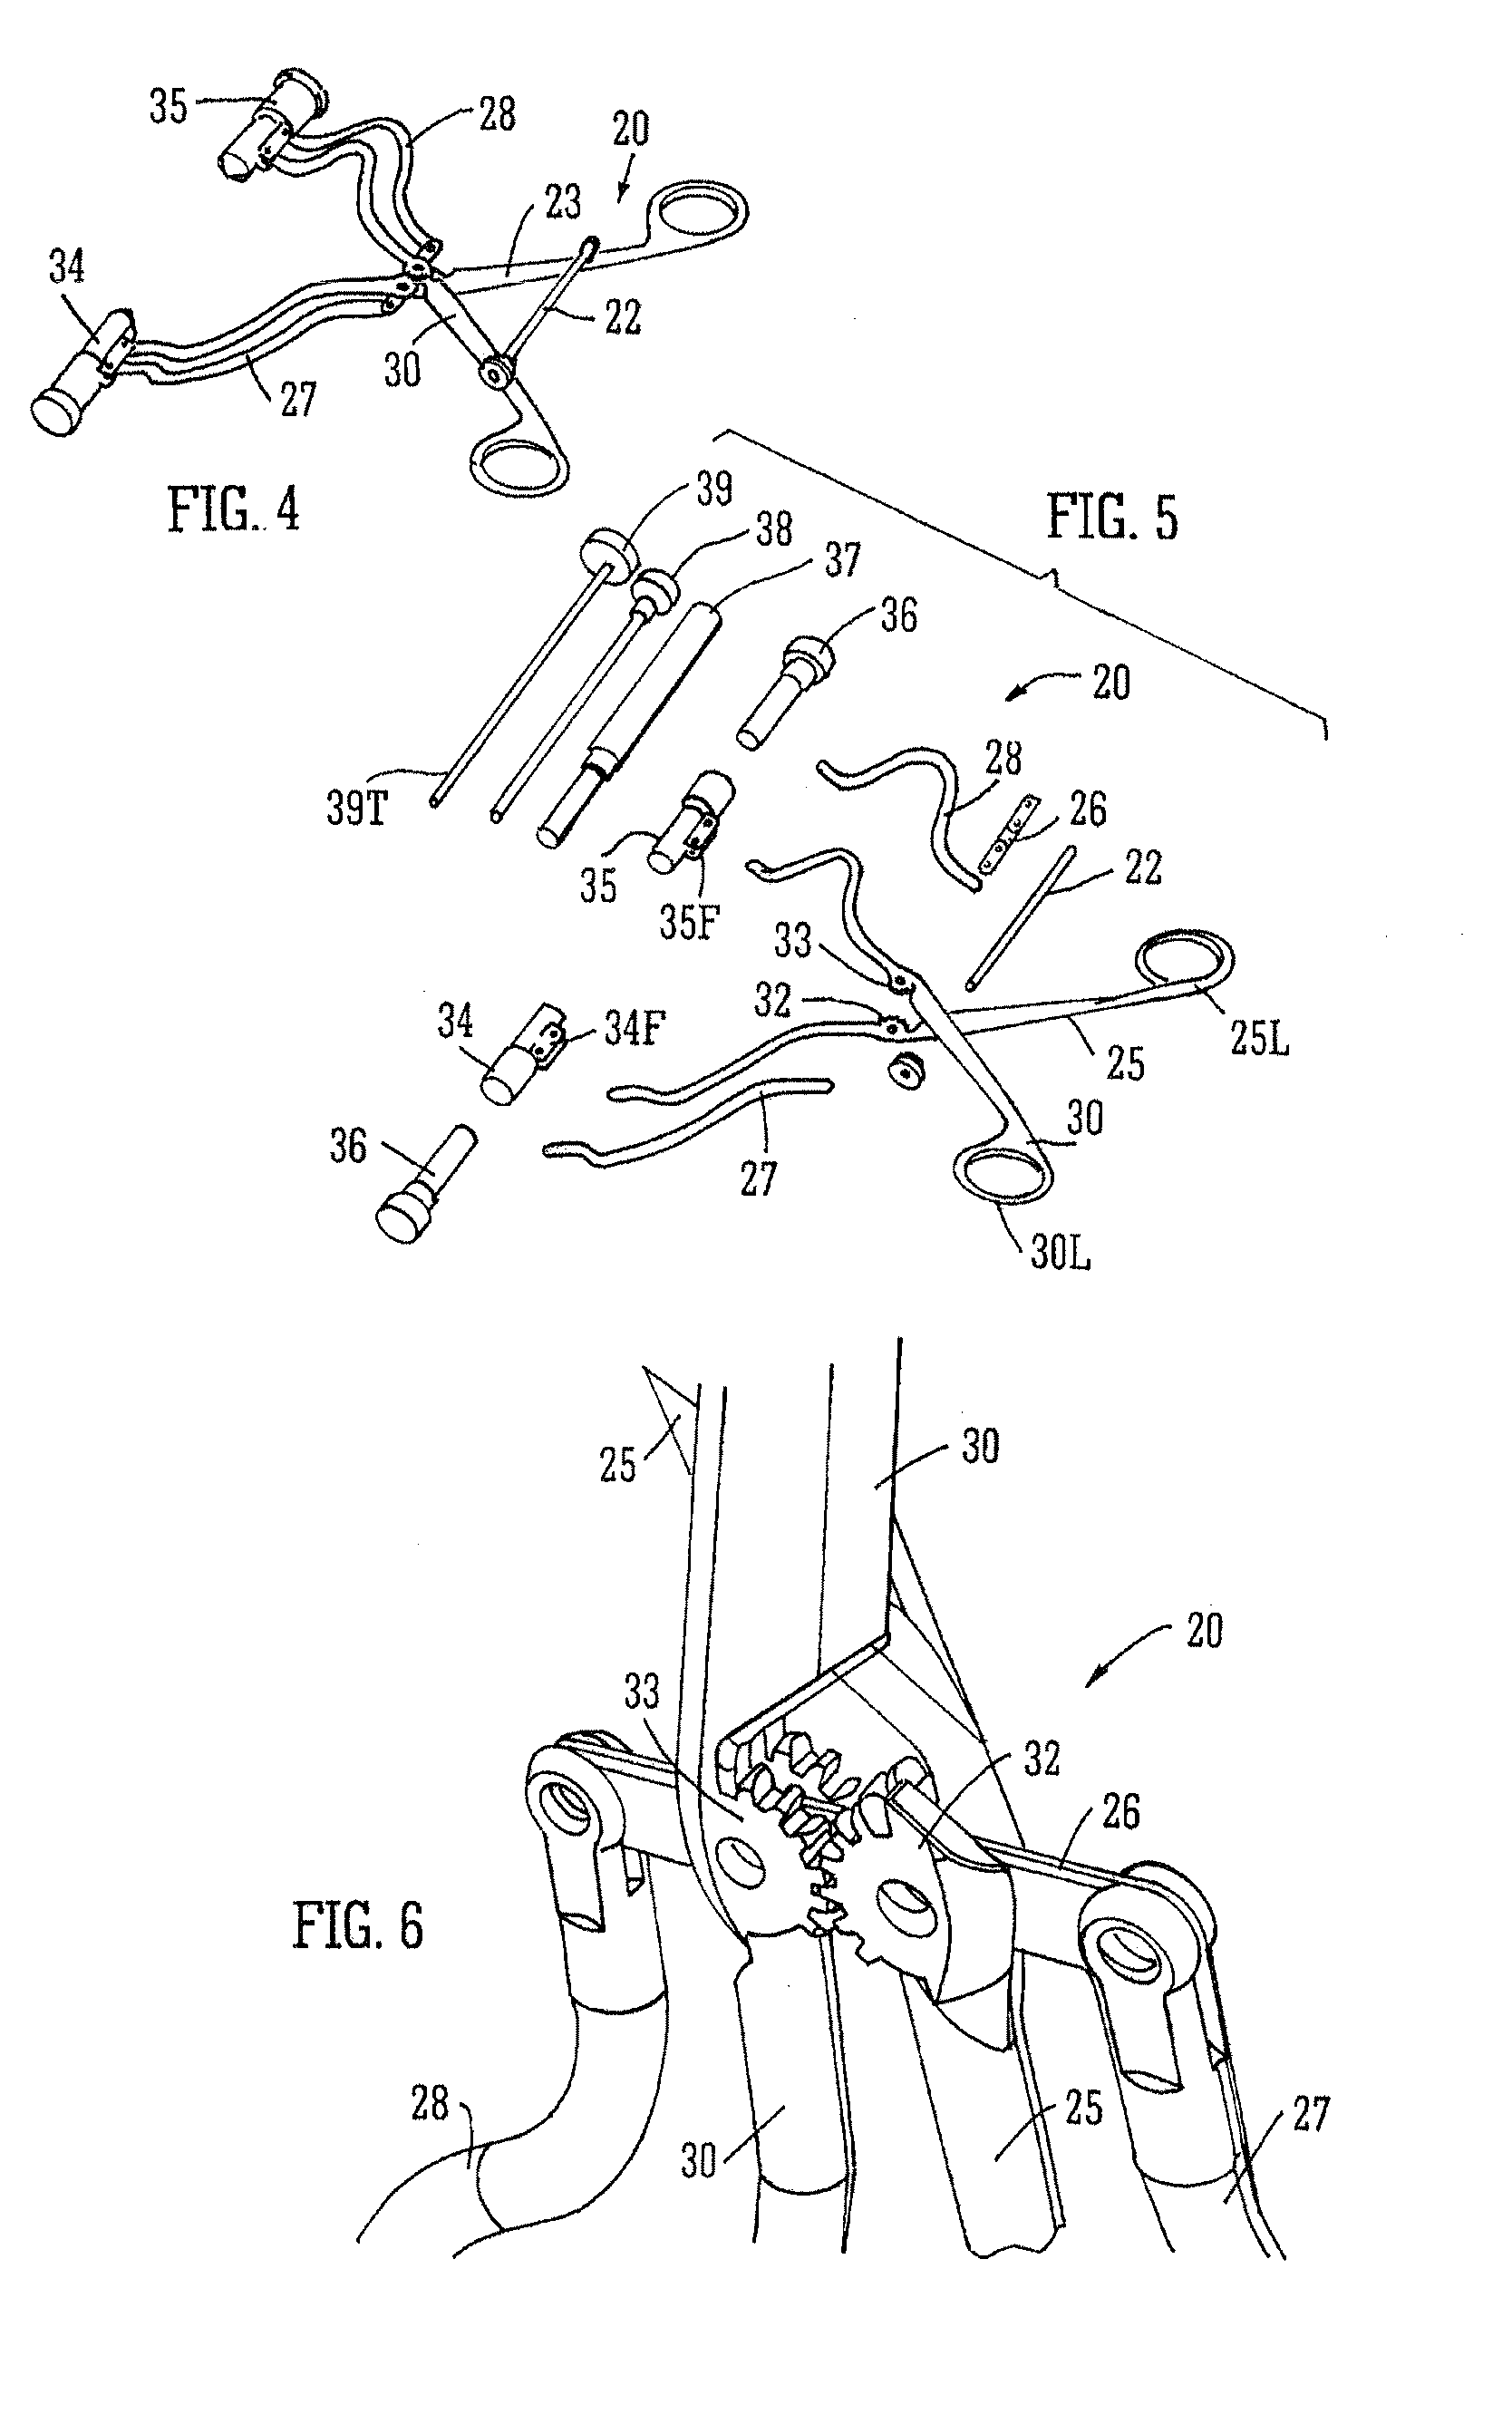 Surgical guide device